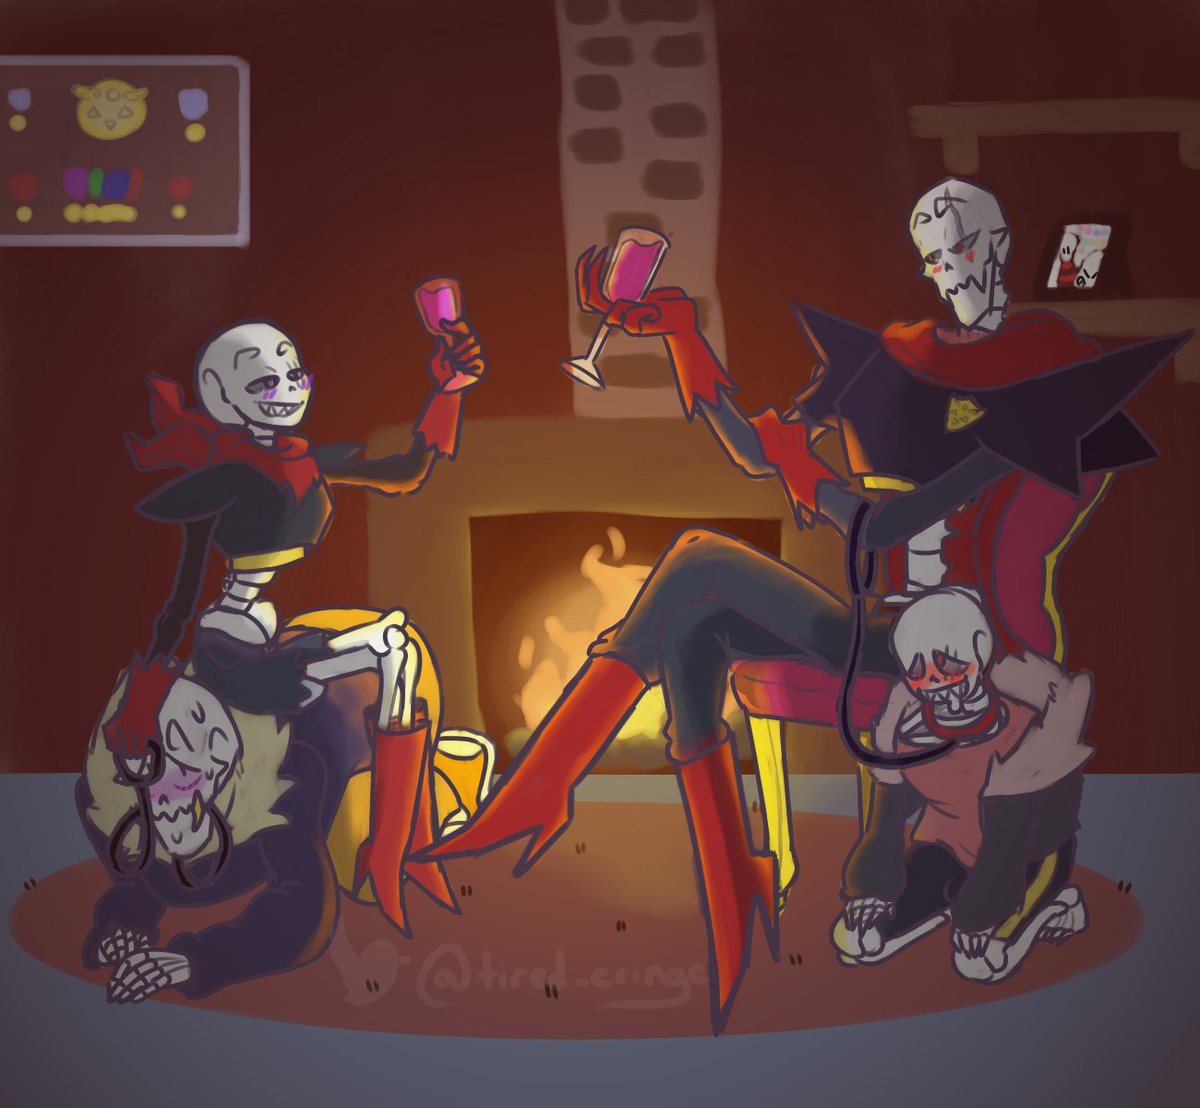 Ретвитнуть. also what is the ship name for uf papyrus x sf sans? 